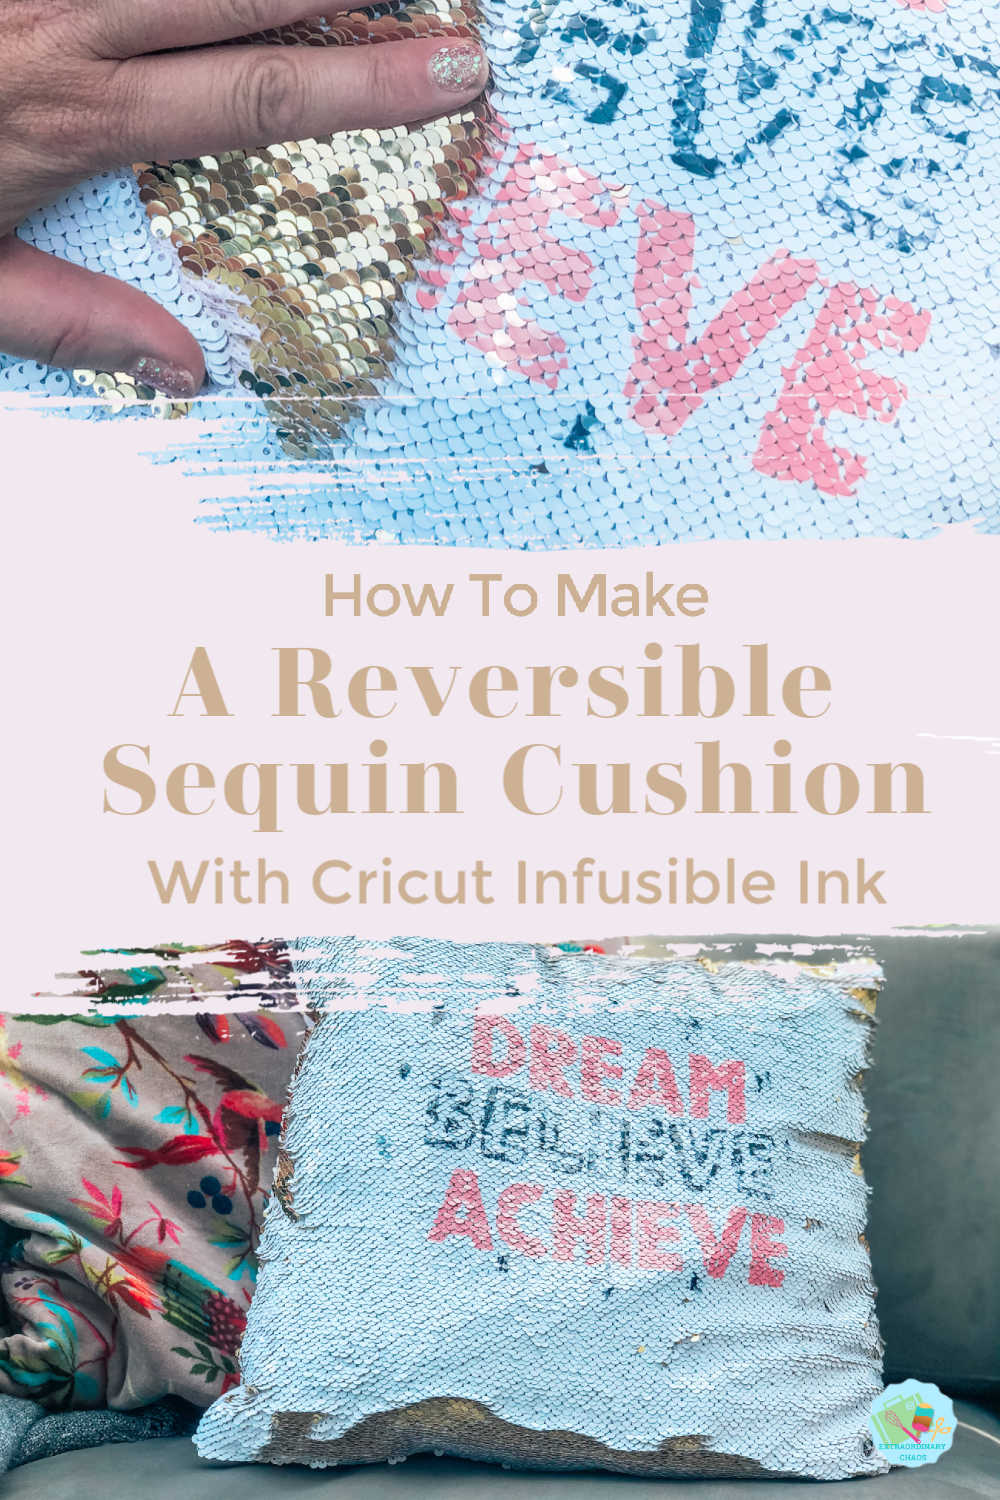 How to make a reversible sequin cushion with Cricut Infusible Ink #infusibleink #cricuttosell ##cricutprojects #sequincushion